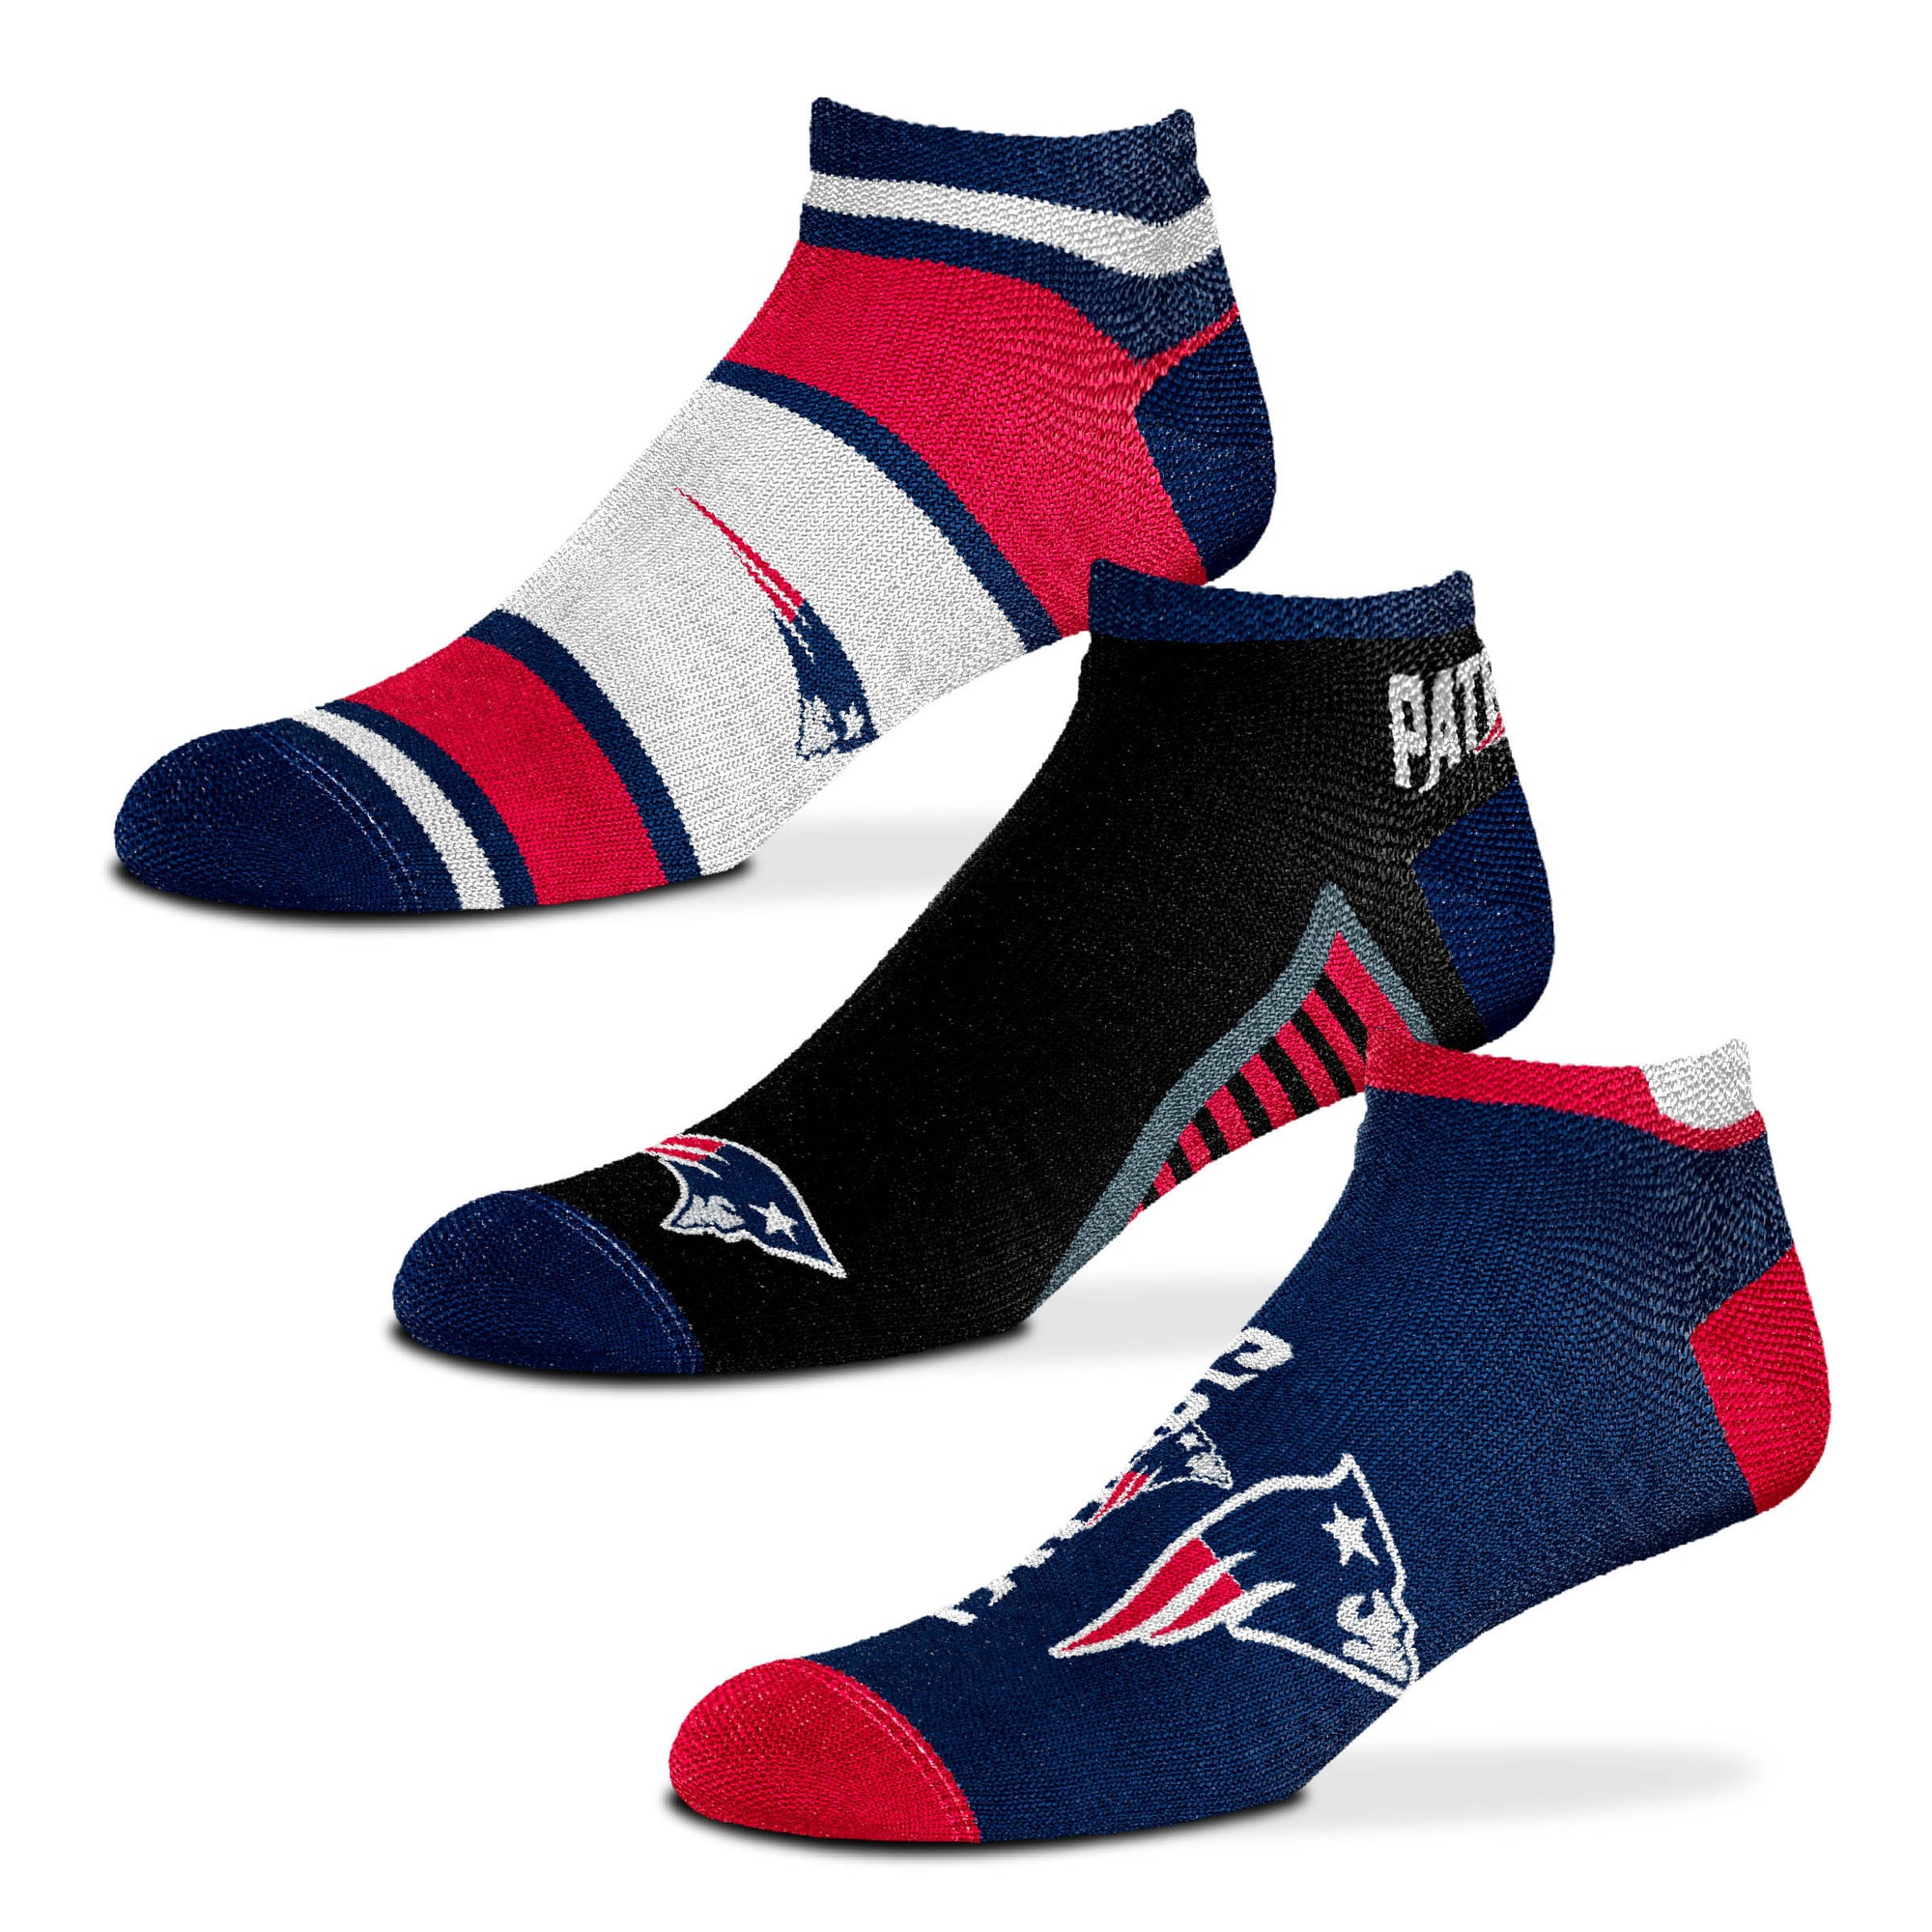 New England Patriots Show Me The Money (3 Pack)